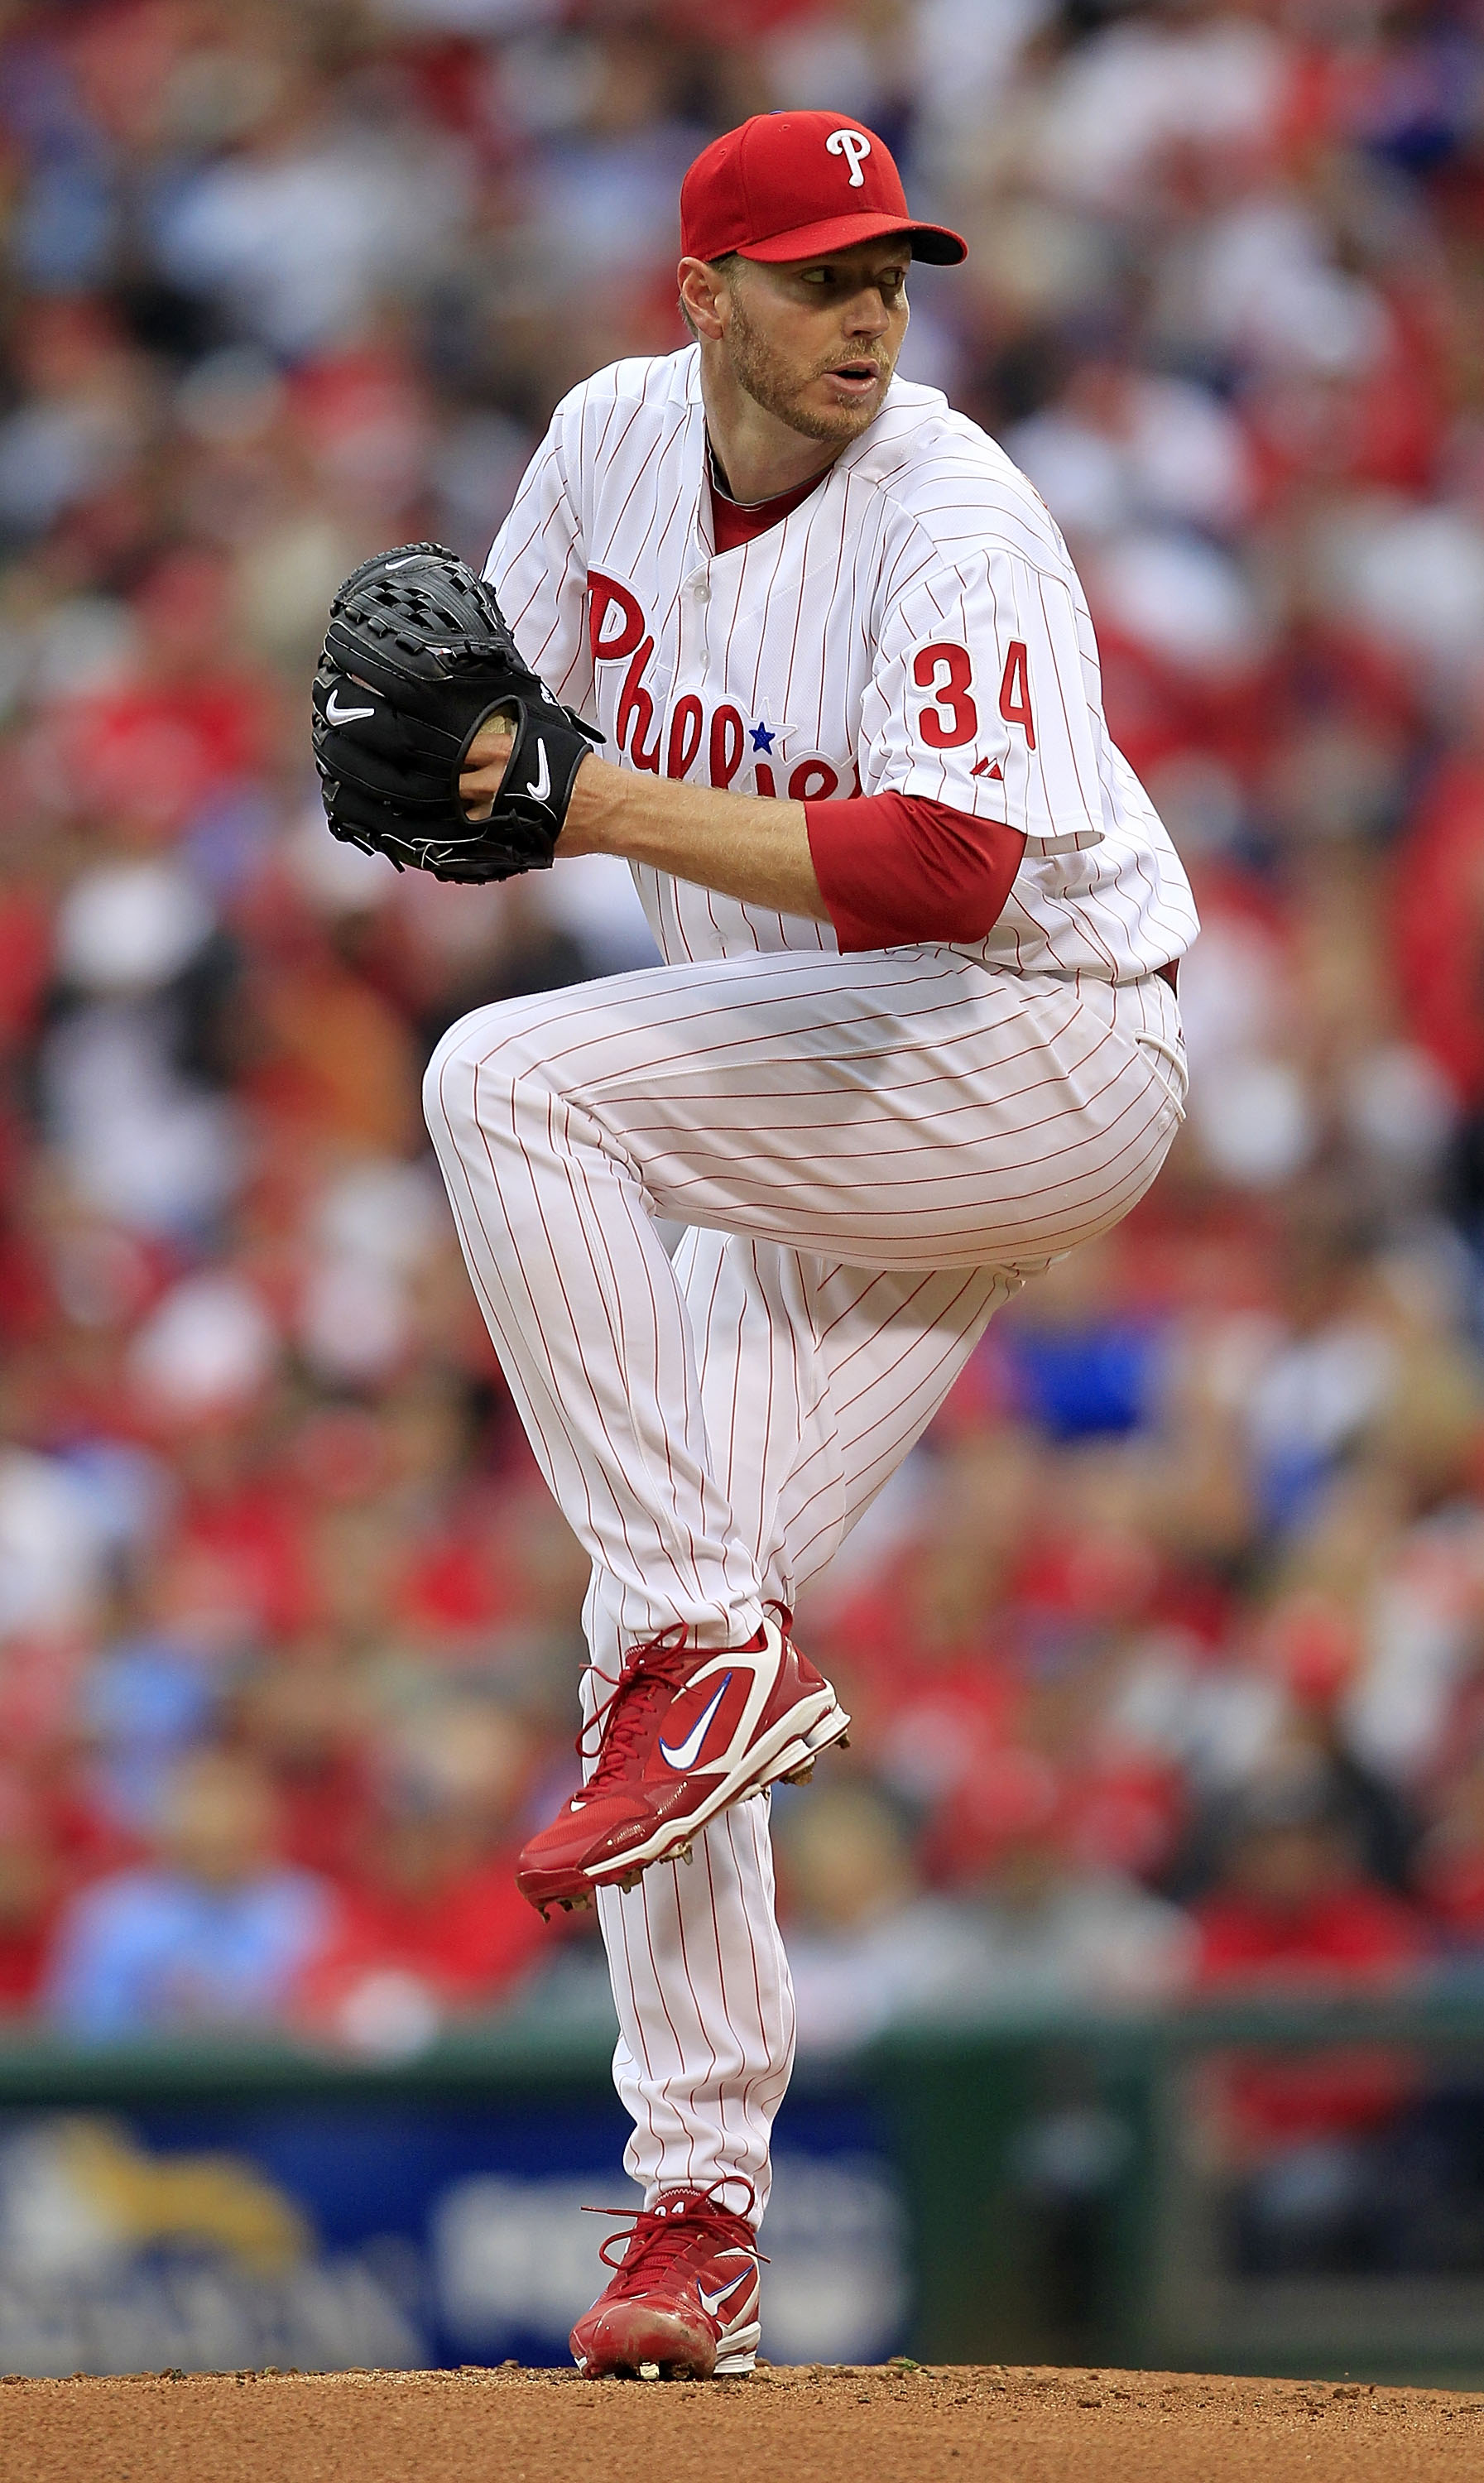 PHILADELPHIA - OCTOBER 06:  Roy Halladay #34 of the Philadelphia Phillies delivers in Game 1 of the NLDS against the Cincinnati Reds at Citizens Bank Park on October 6, 2010 in Philadelphia, Pennsylvania.  (Photo by Chris Trotman/Getty Images)